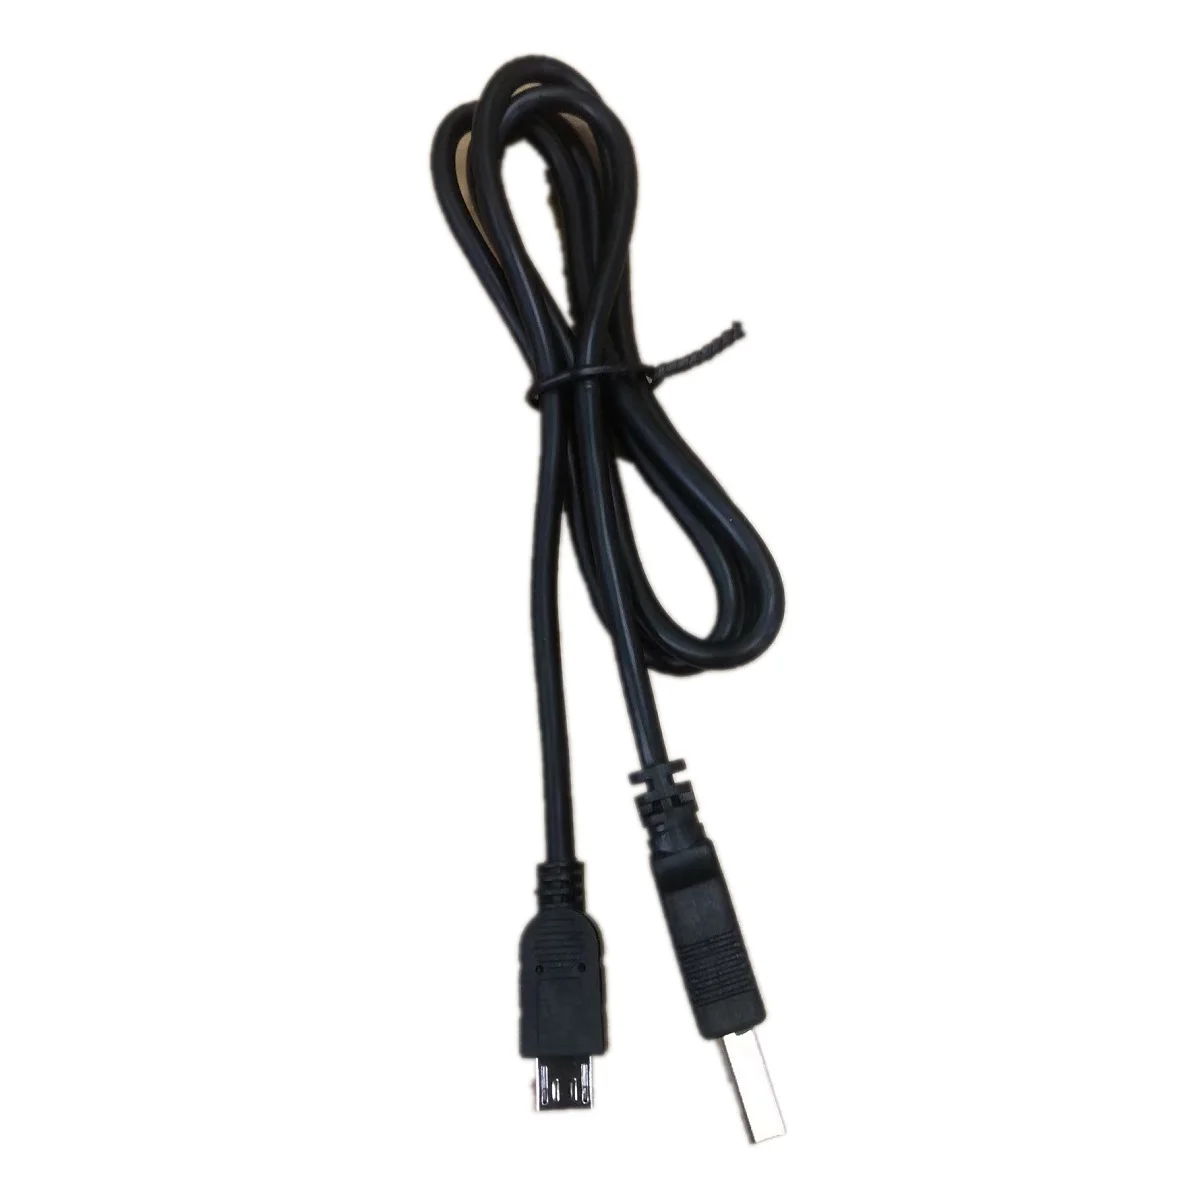 Anytone Programming Cable for AT D578UV DMR Mobile Radio PC Data Line Mini USB to Standard USB Accessory pic